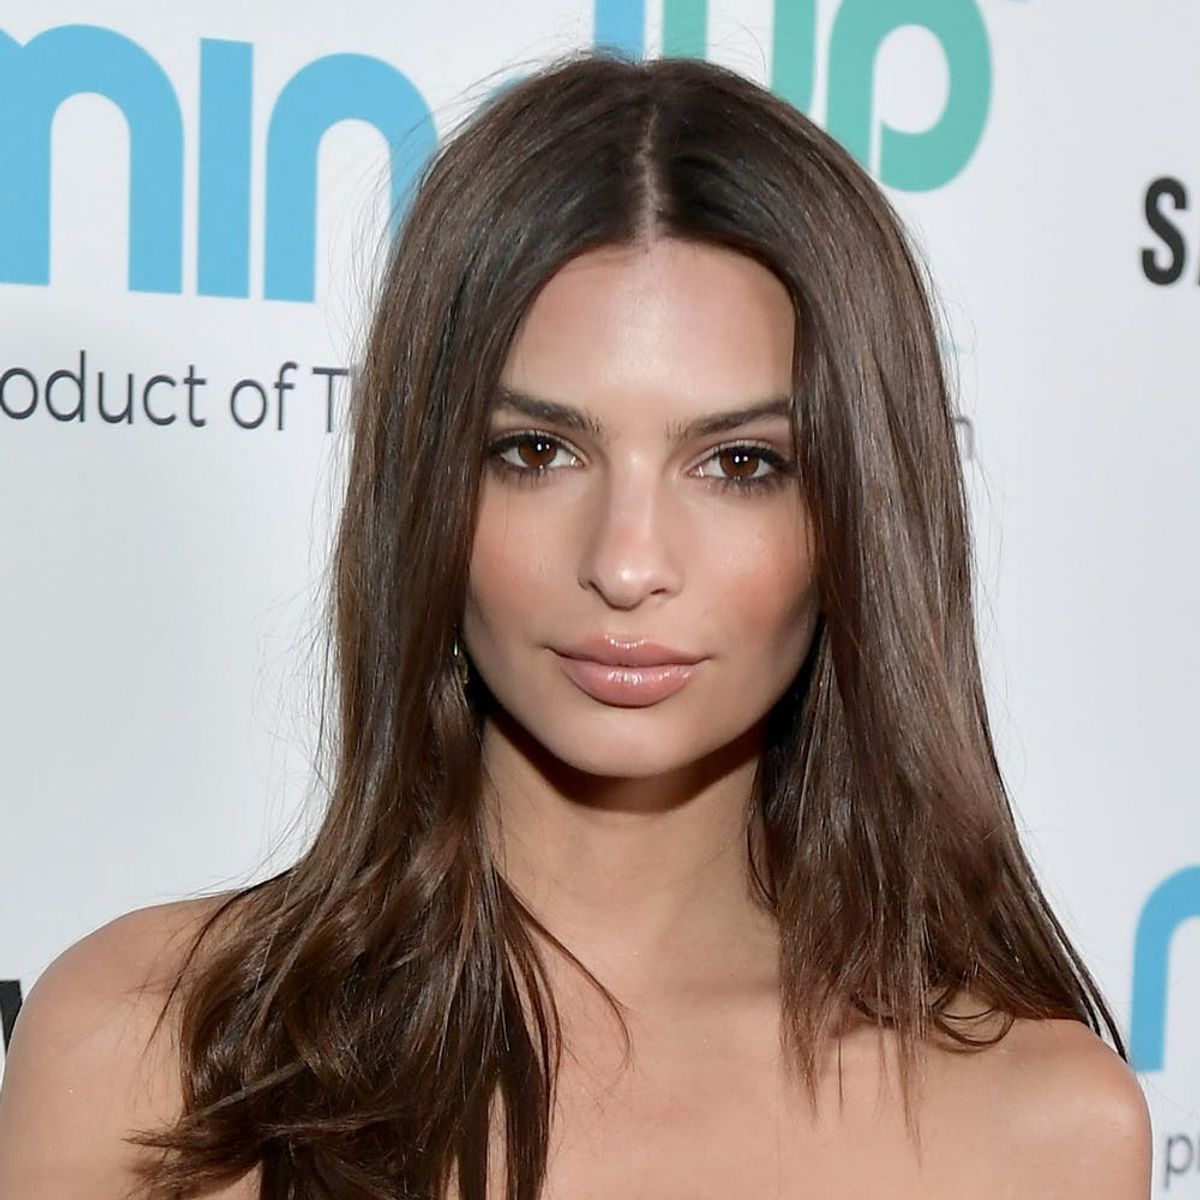 Uh-Oh: Emily Ratajkowski Is in Trouble for Allegedly Copying Swimsuit Designs